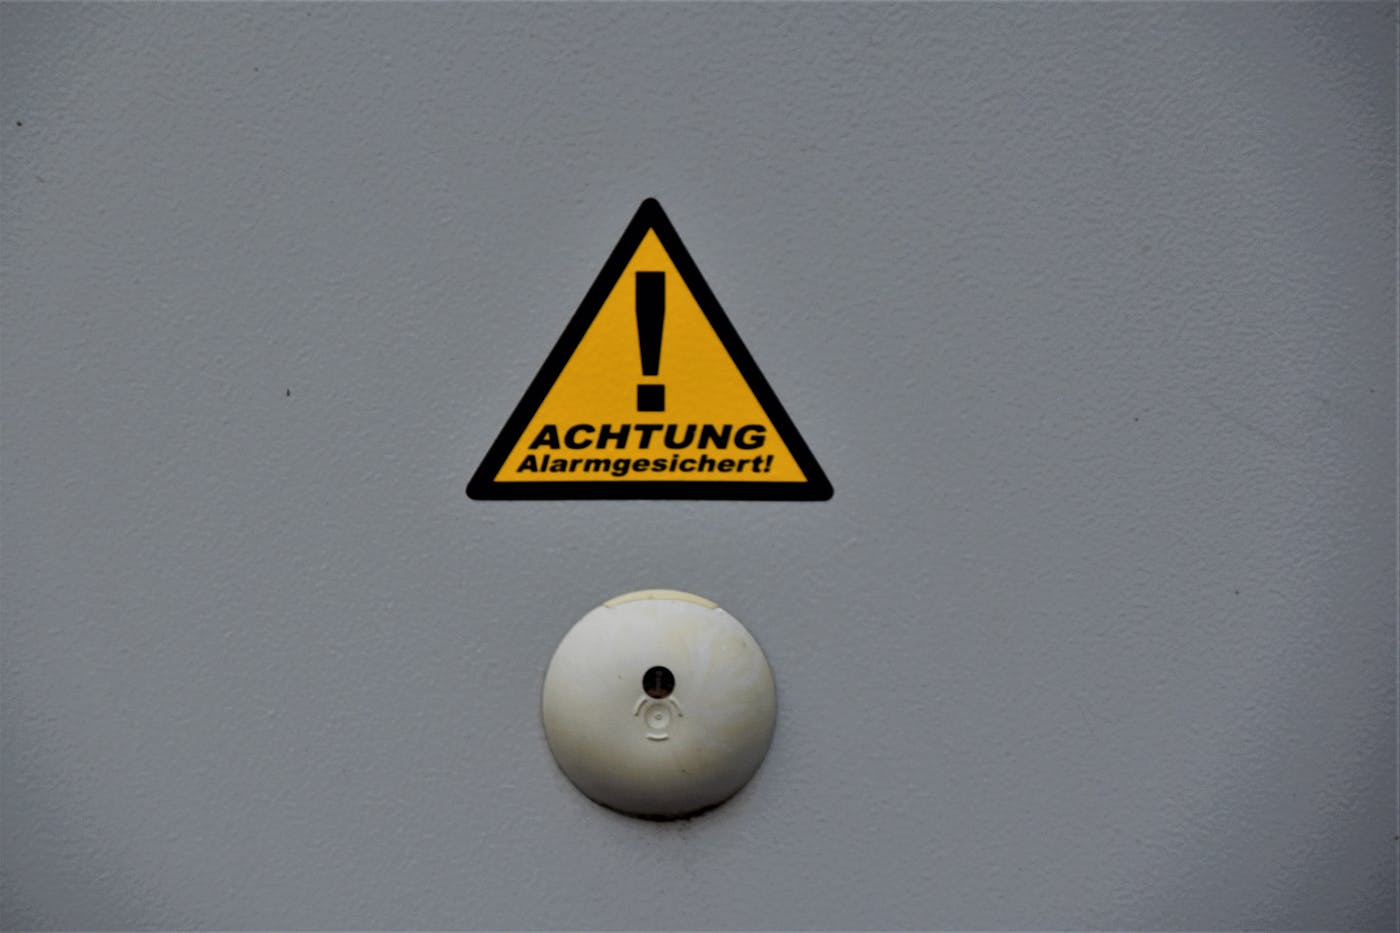 A triangular sign over a bell reading achtung!